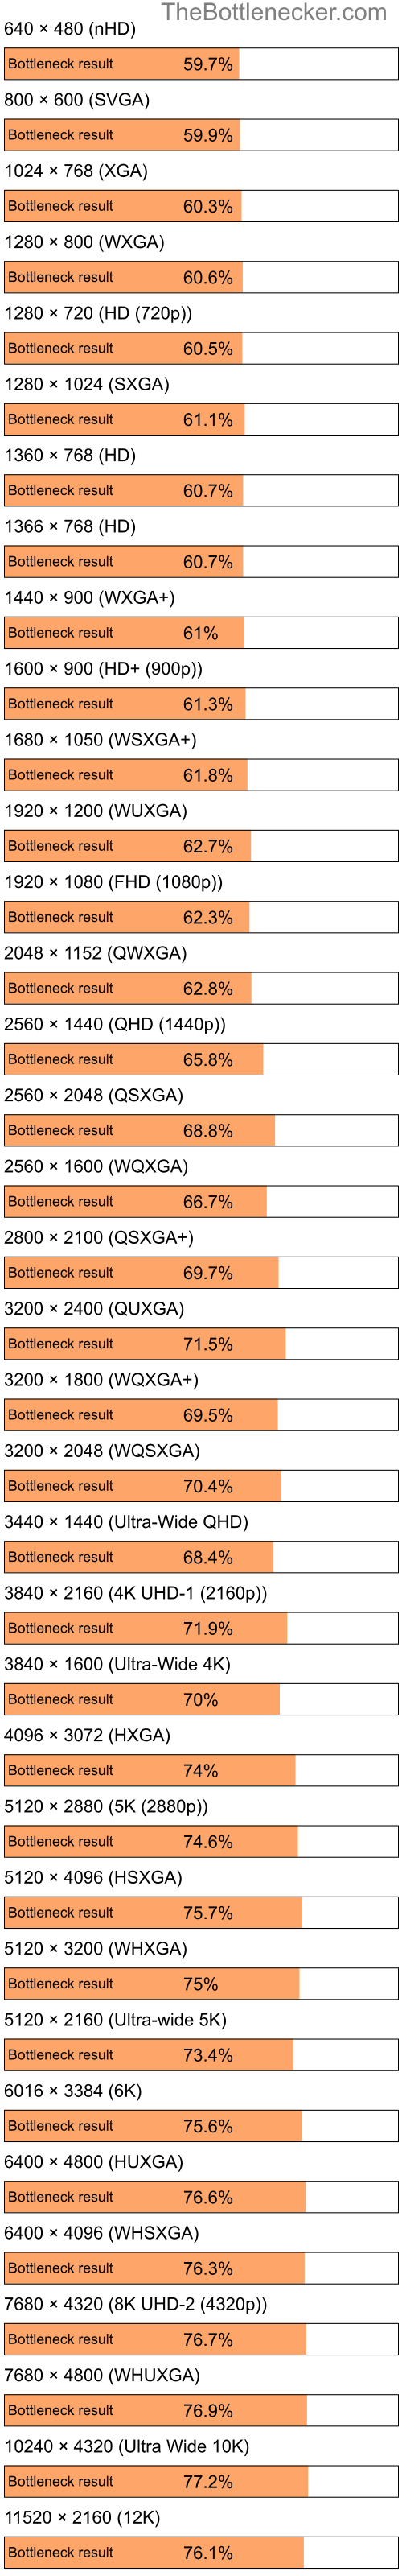 Bottleneck results by resolution for Intel Celeron and AMD Radeon X800 XL in Processor Intense Tasks